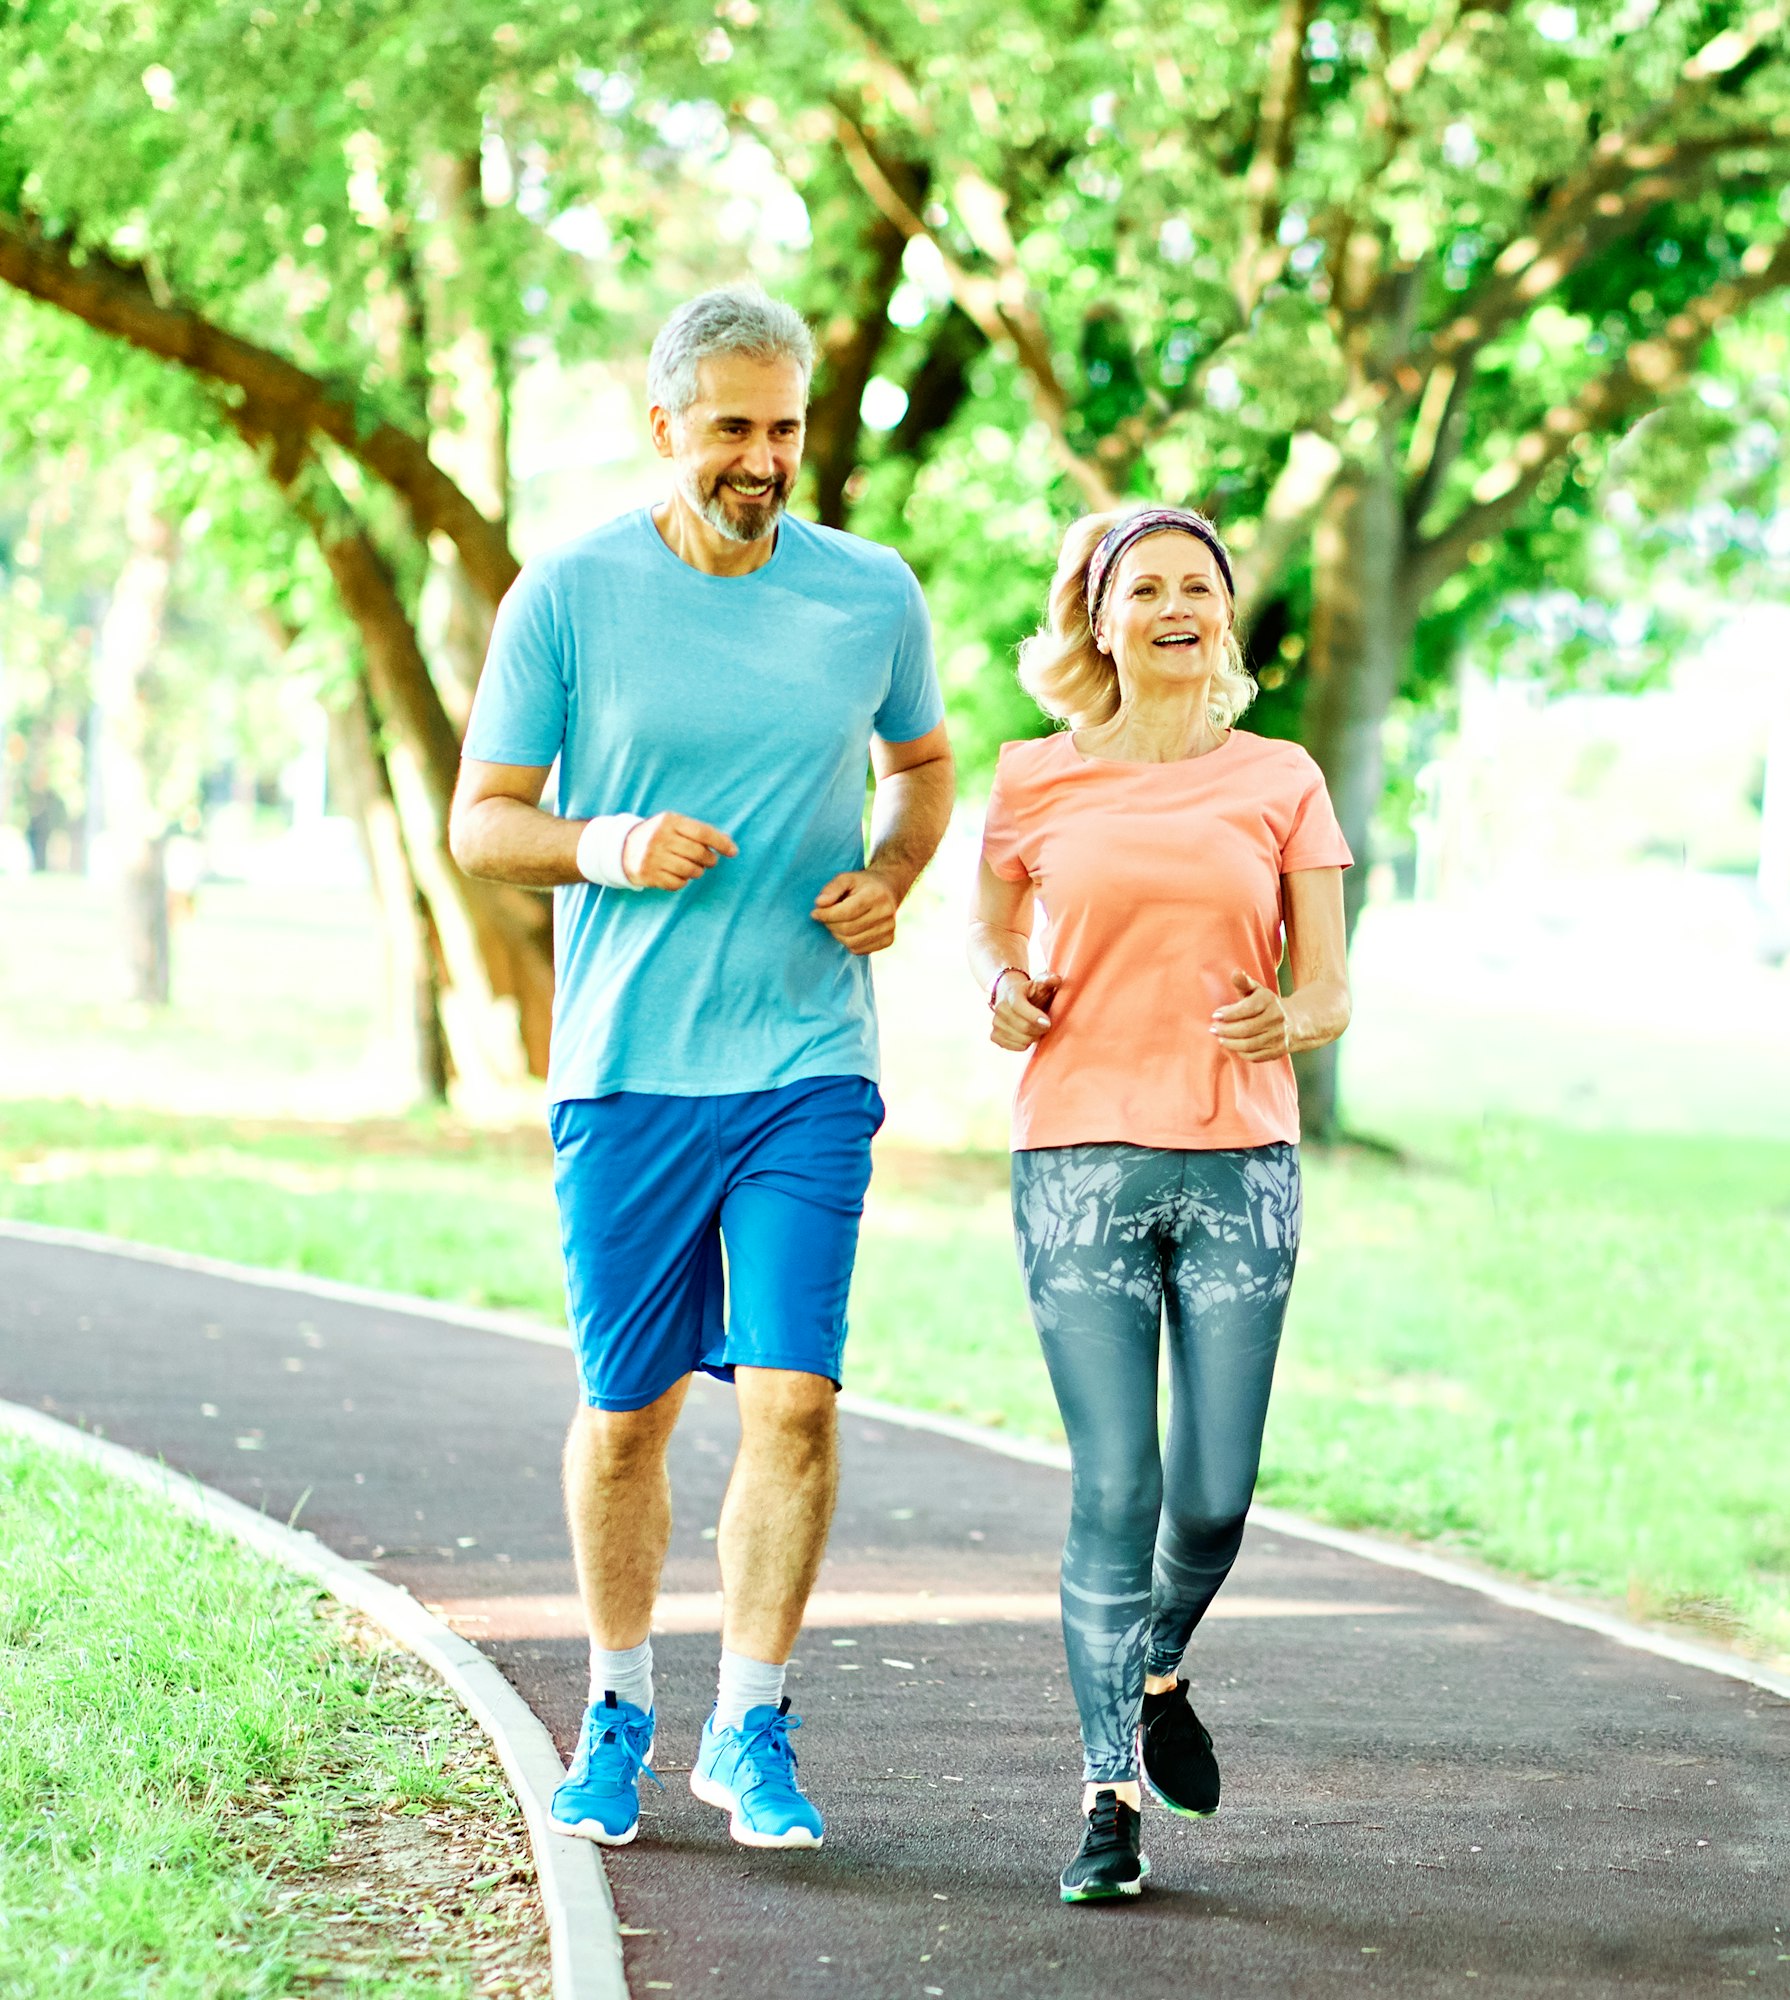 woman senior man outdoor running couple lifestyle sport smiling together jogging